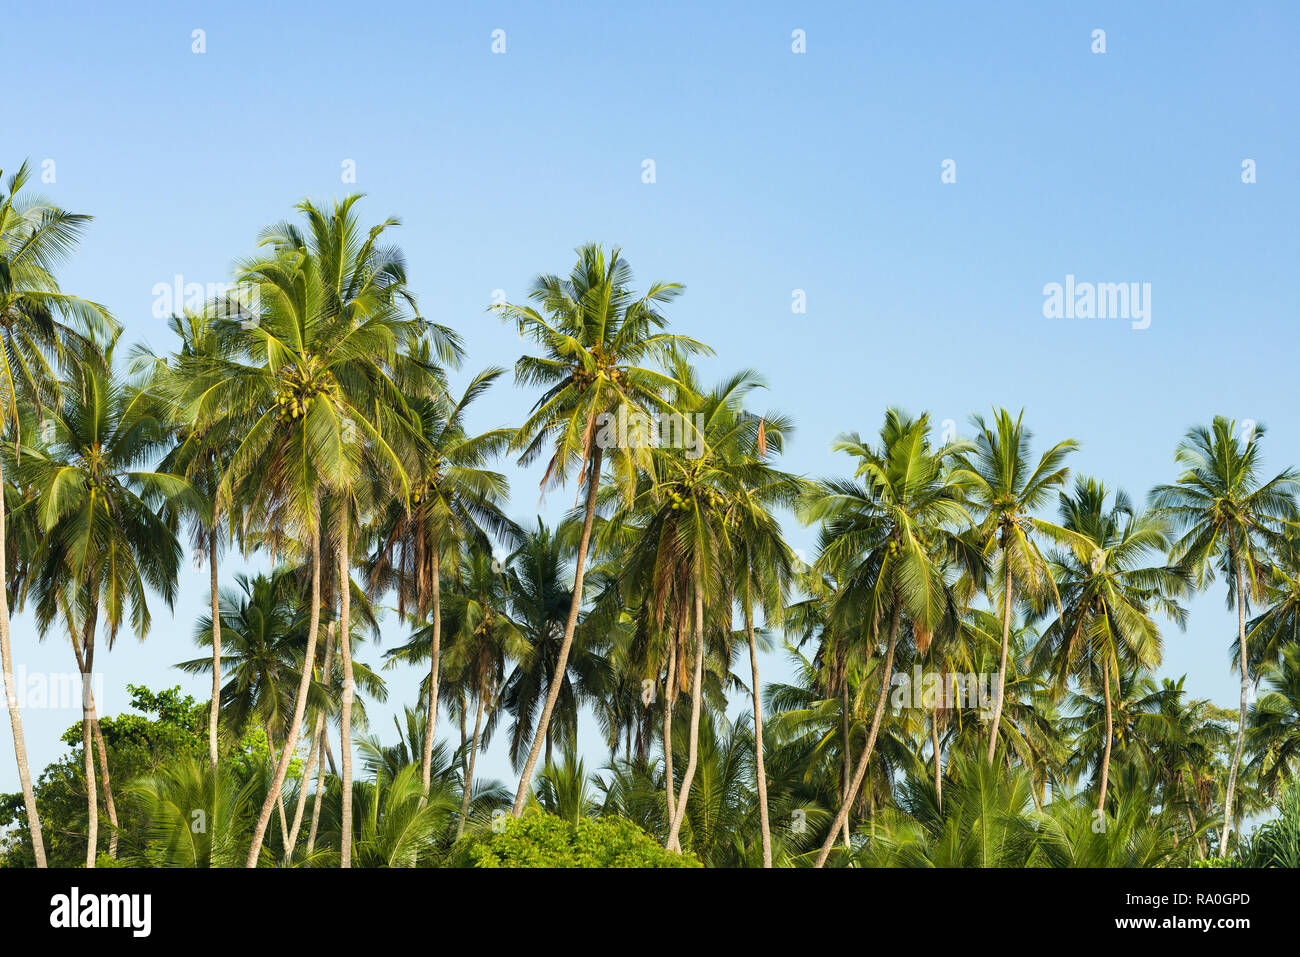 Coconut palm trees ( Arecaceae or Cocos nucifera ) in early morning light against a clear blue sky Stock Photo